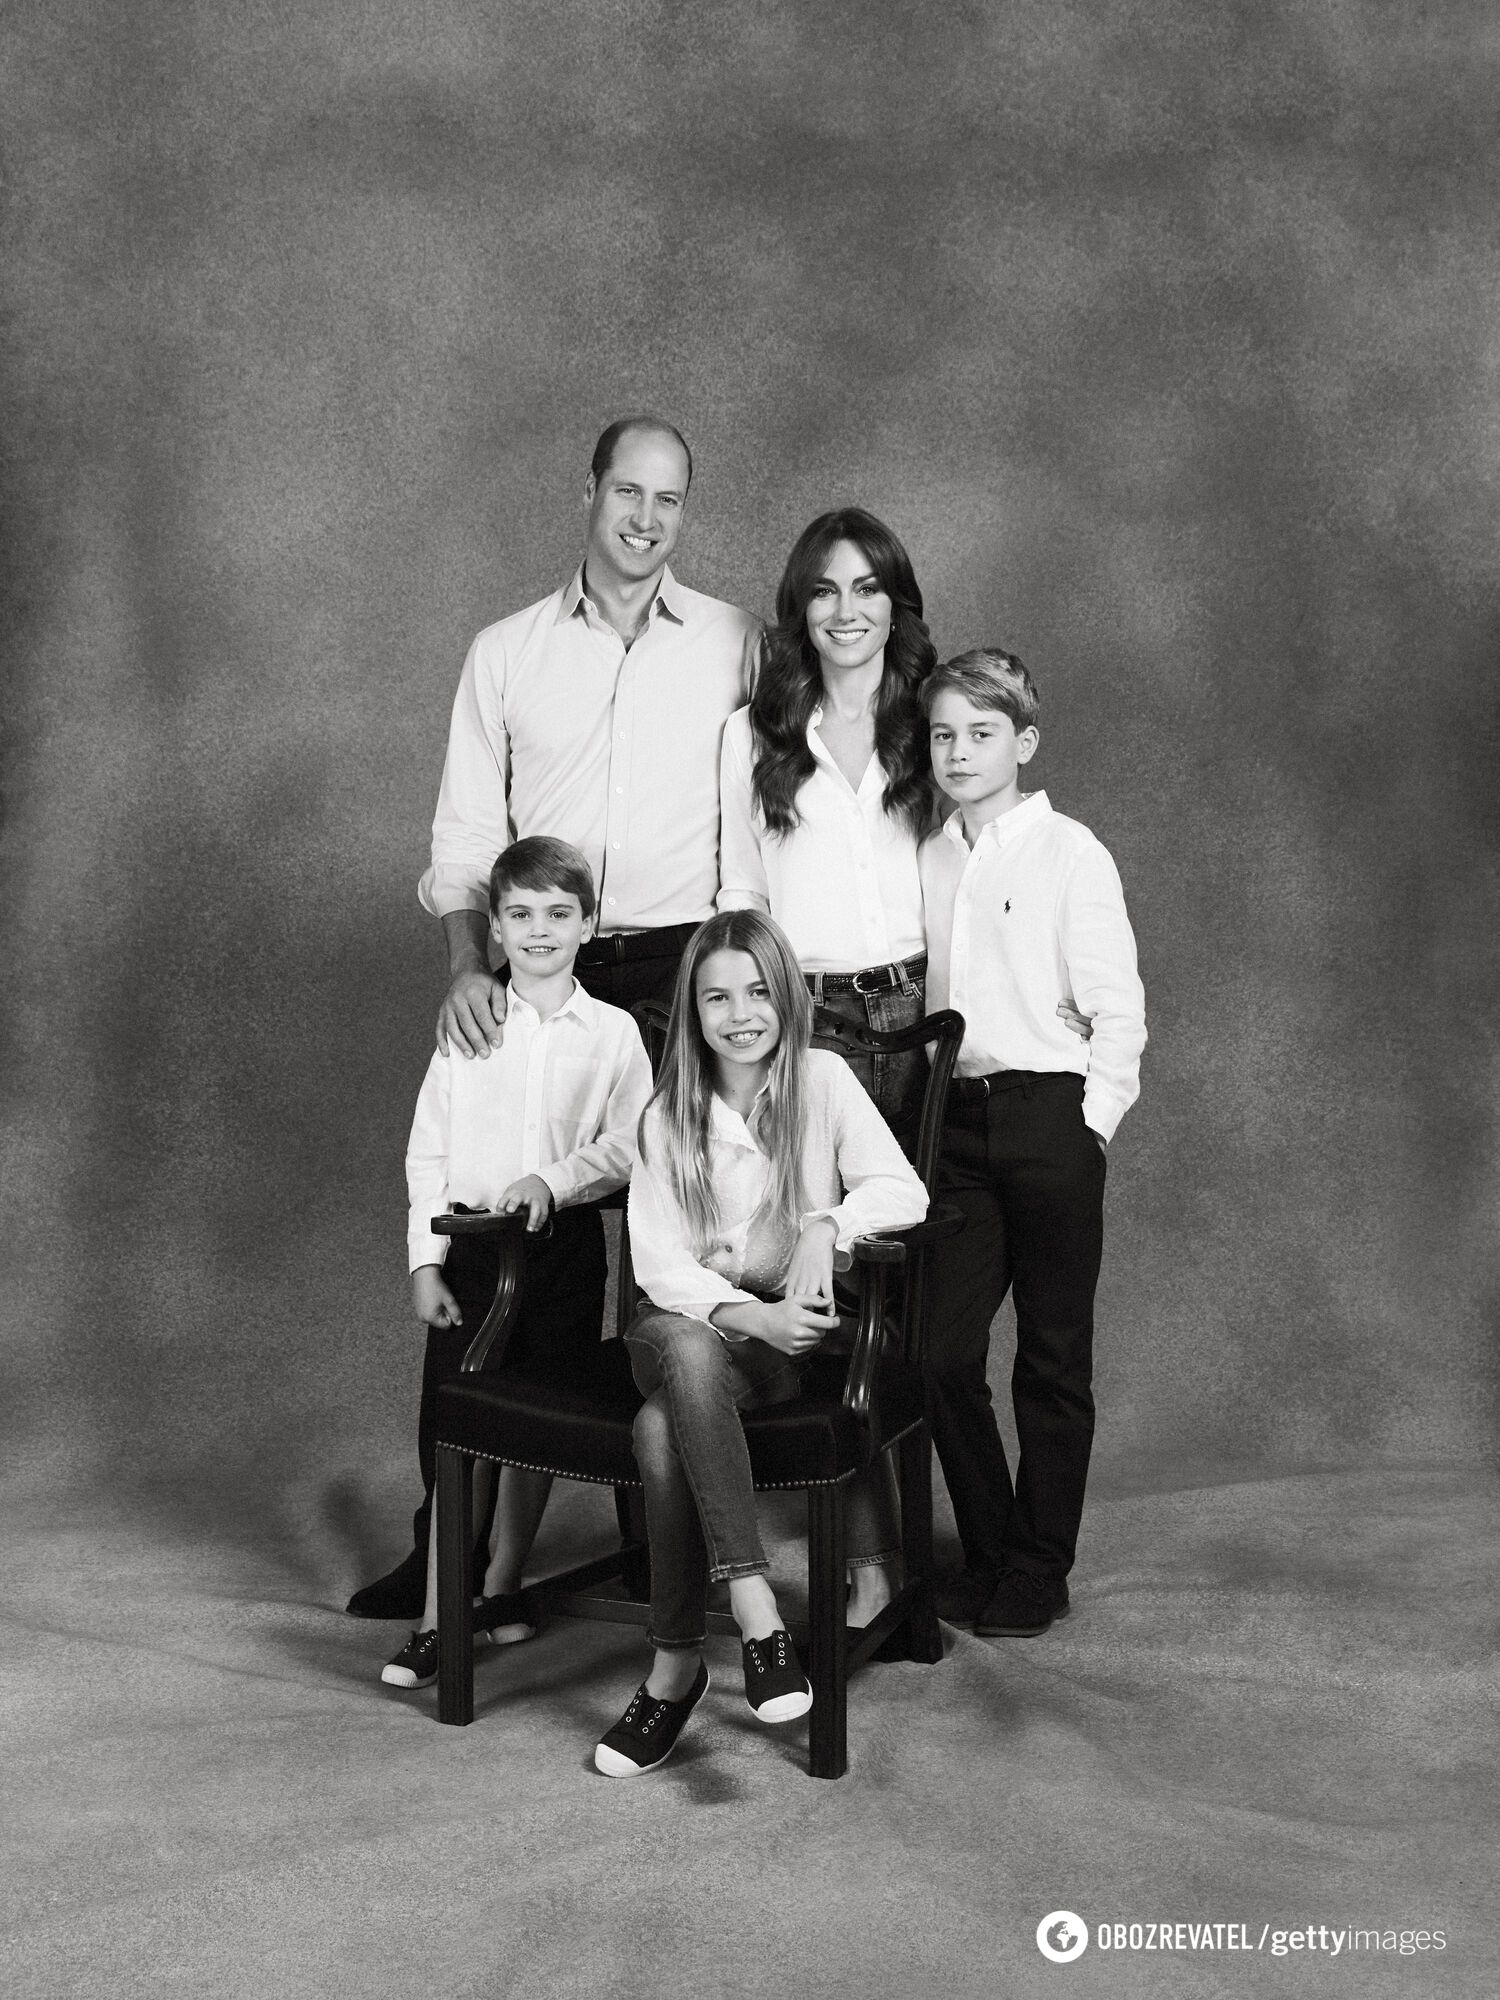 Black and white photo of Kate Middleton and Prince William alarmed fans of the royal family